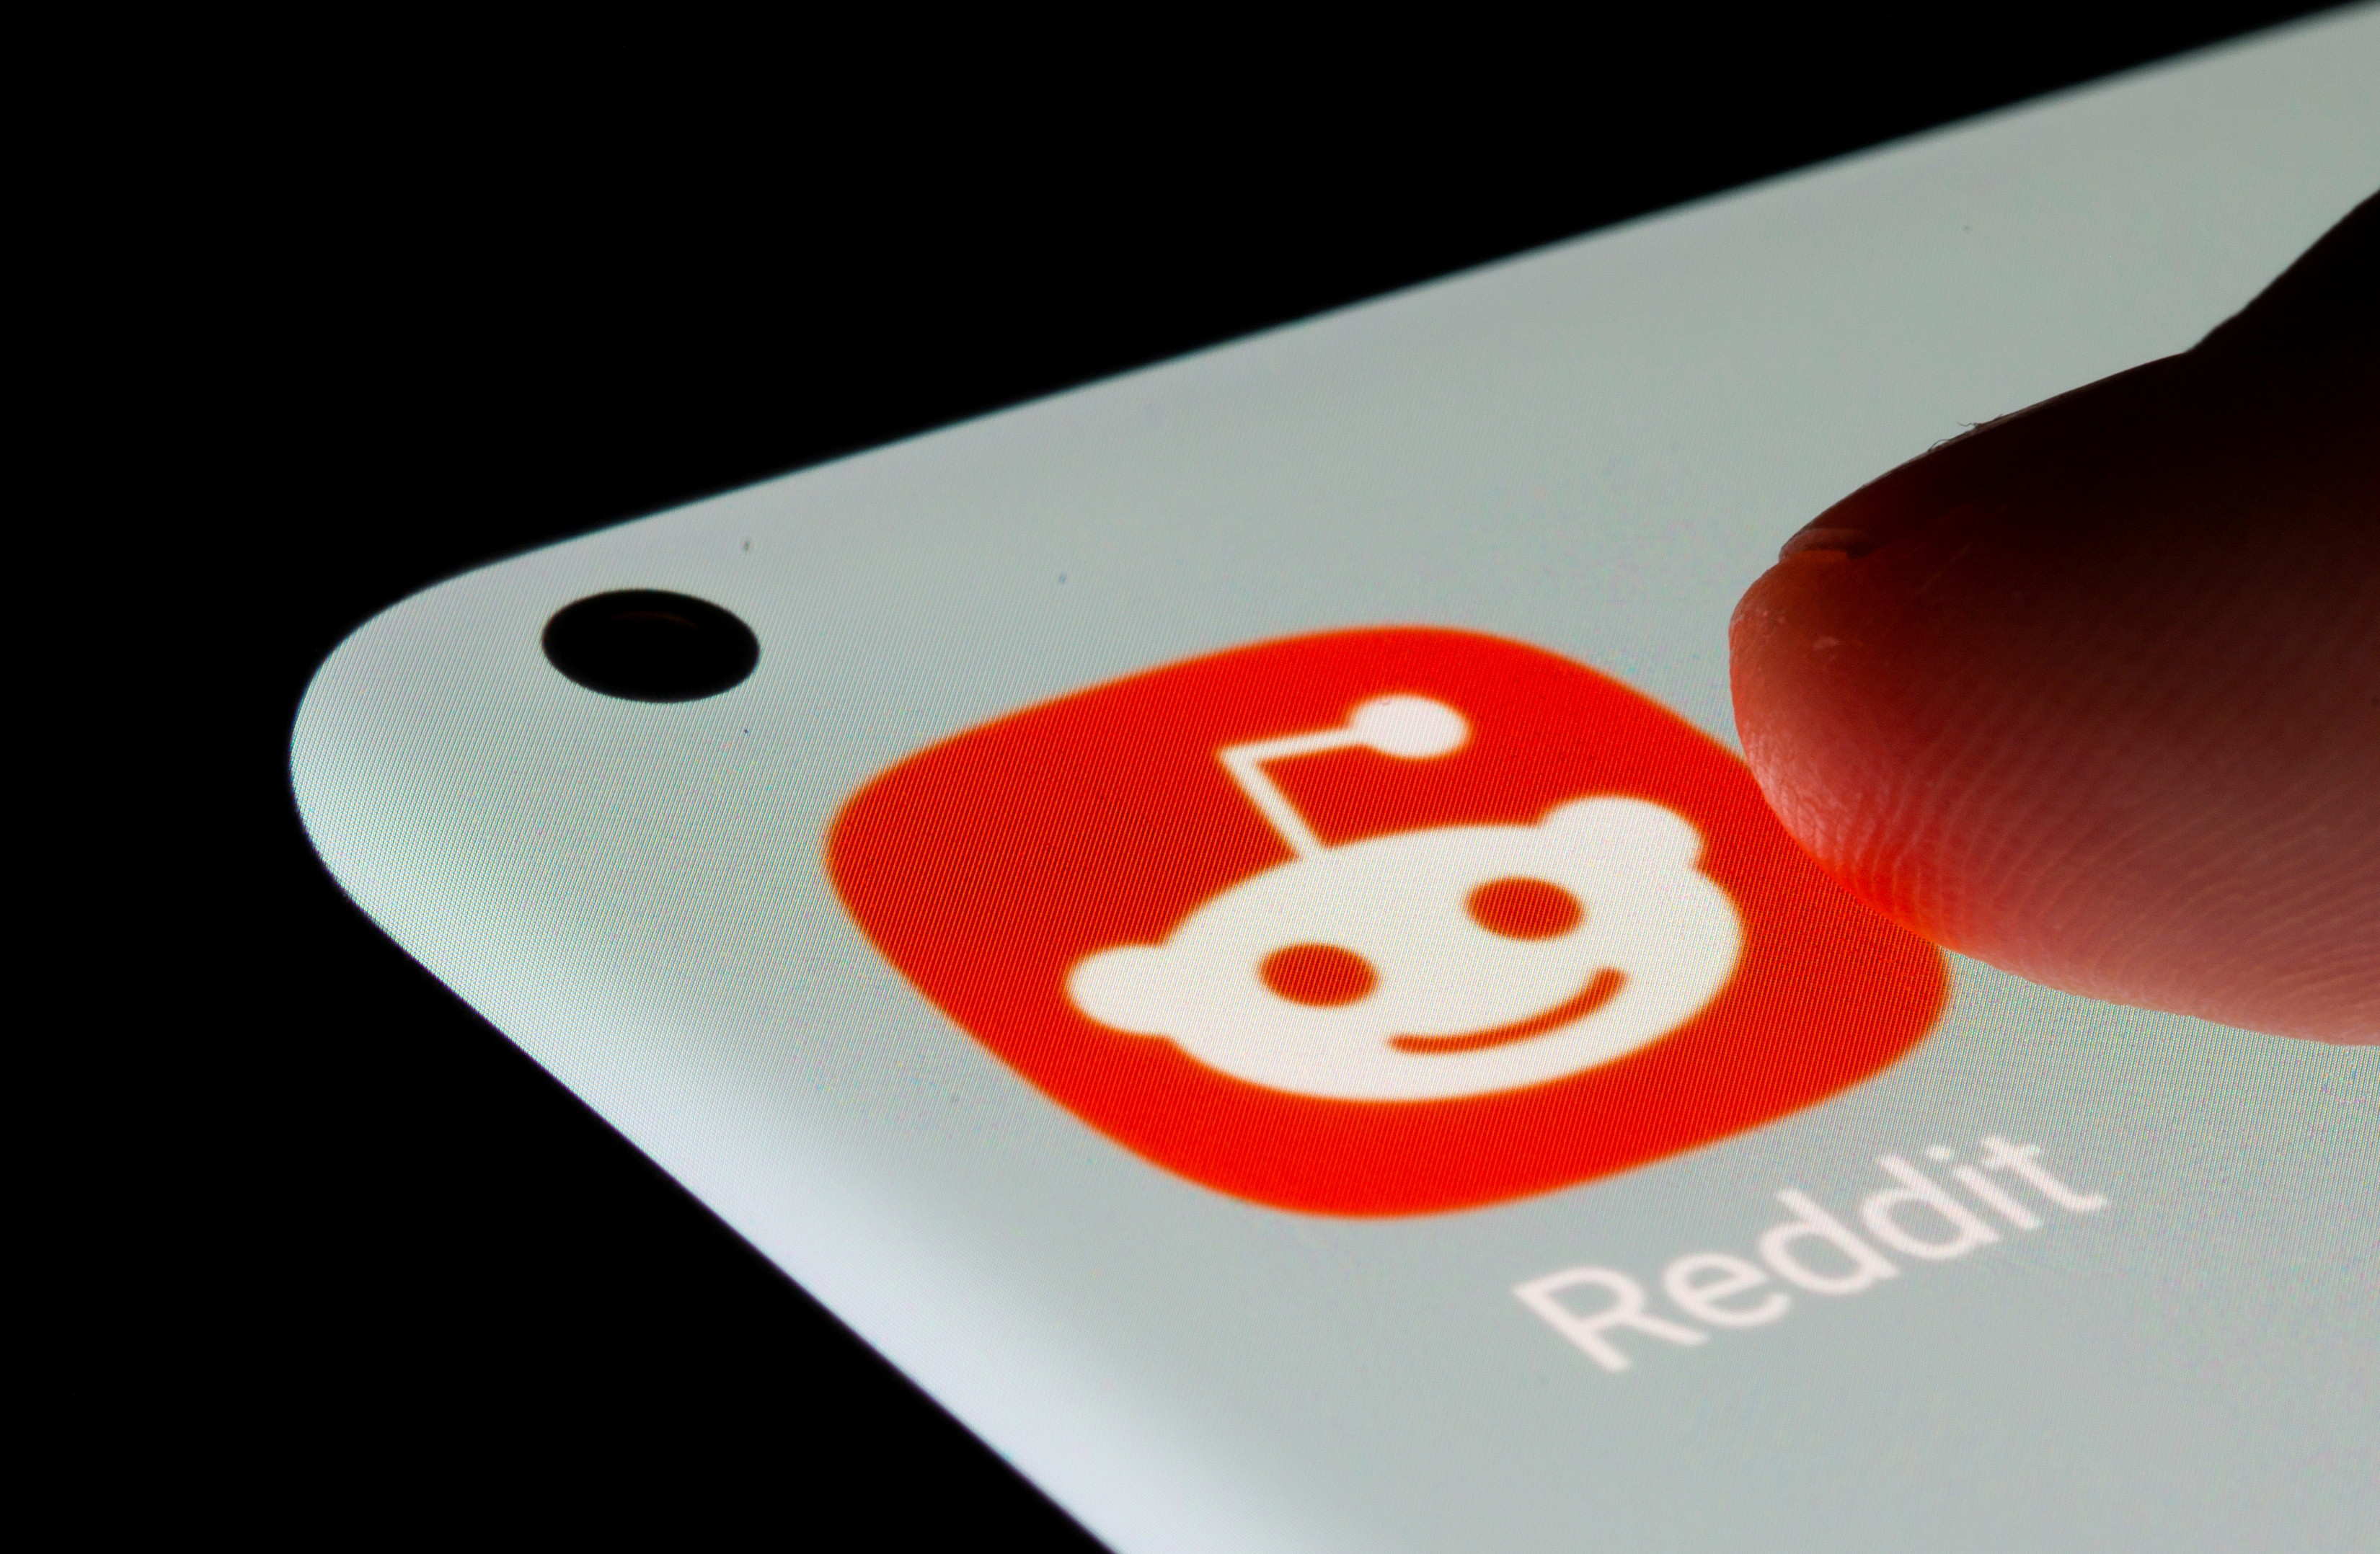 Reddit to allow users to upload NSFW images from desktop